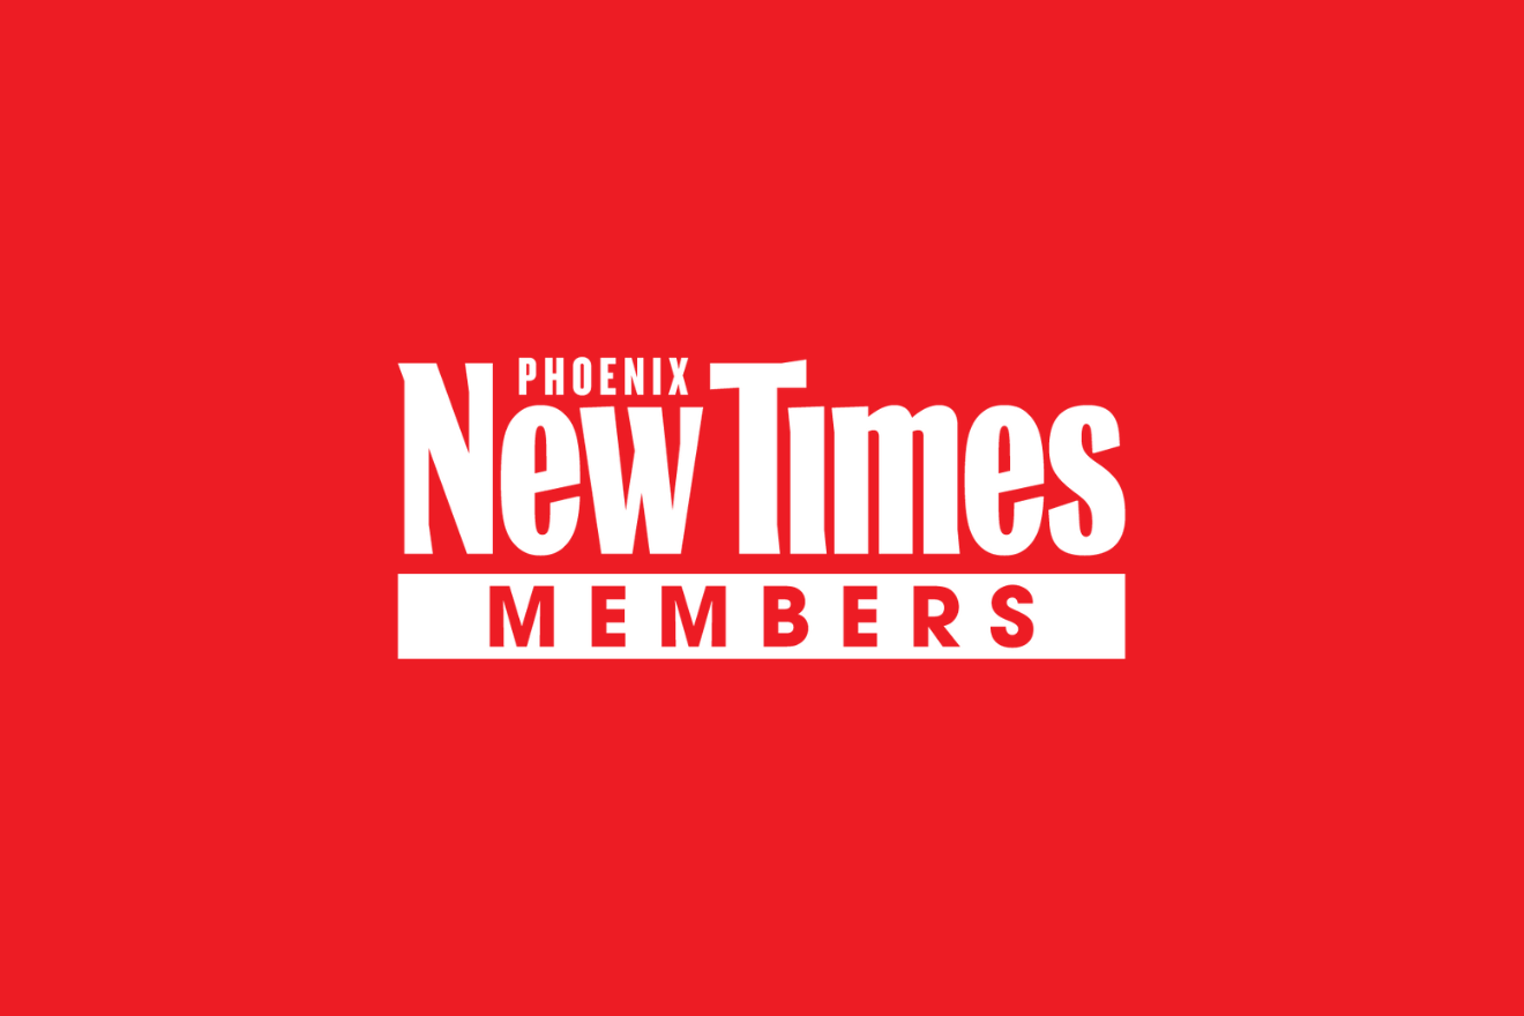 Phoenix New Times new membership manager, adds more perks